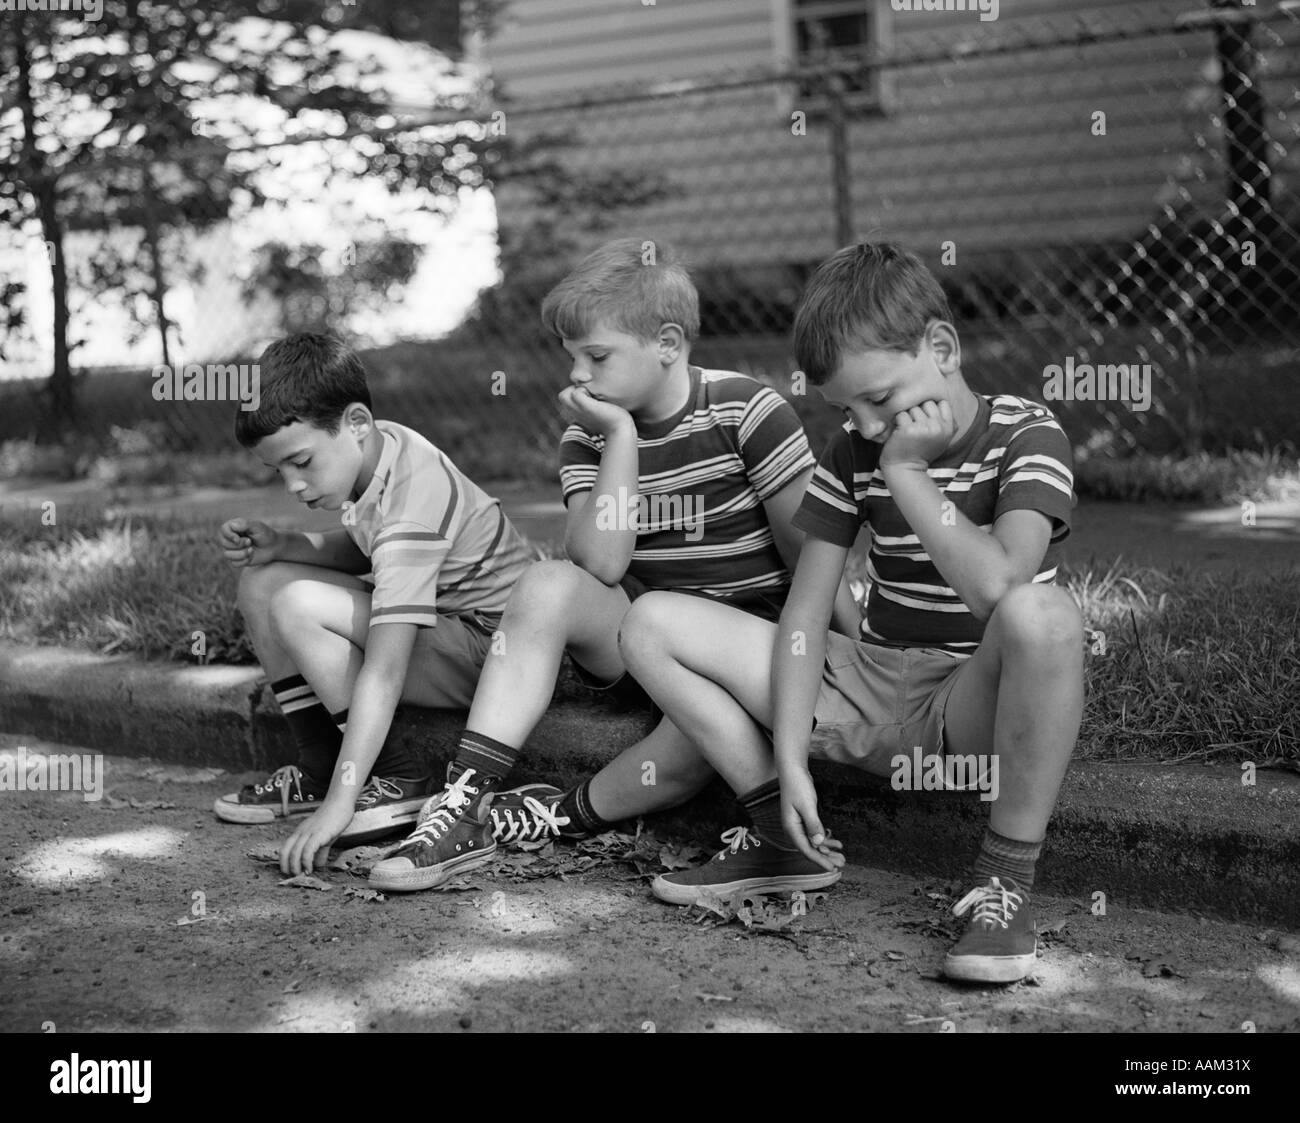 1970s THREE BORED BOYS SITTING ON CURB ALL WEARING STRIPED TEE SHIRTS SHORTS  AND SNEAKERS Stock Photo - Alamy